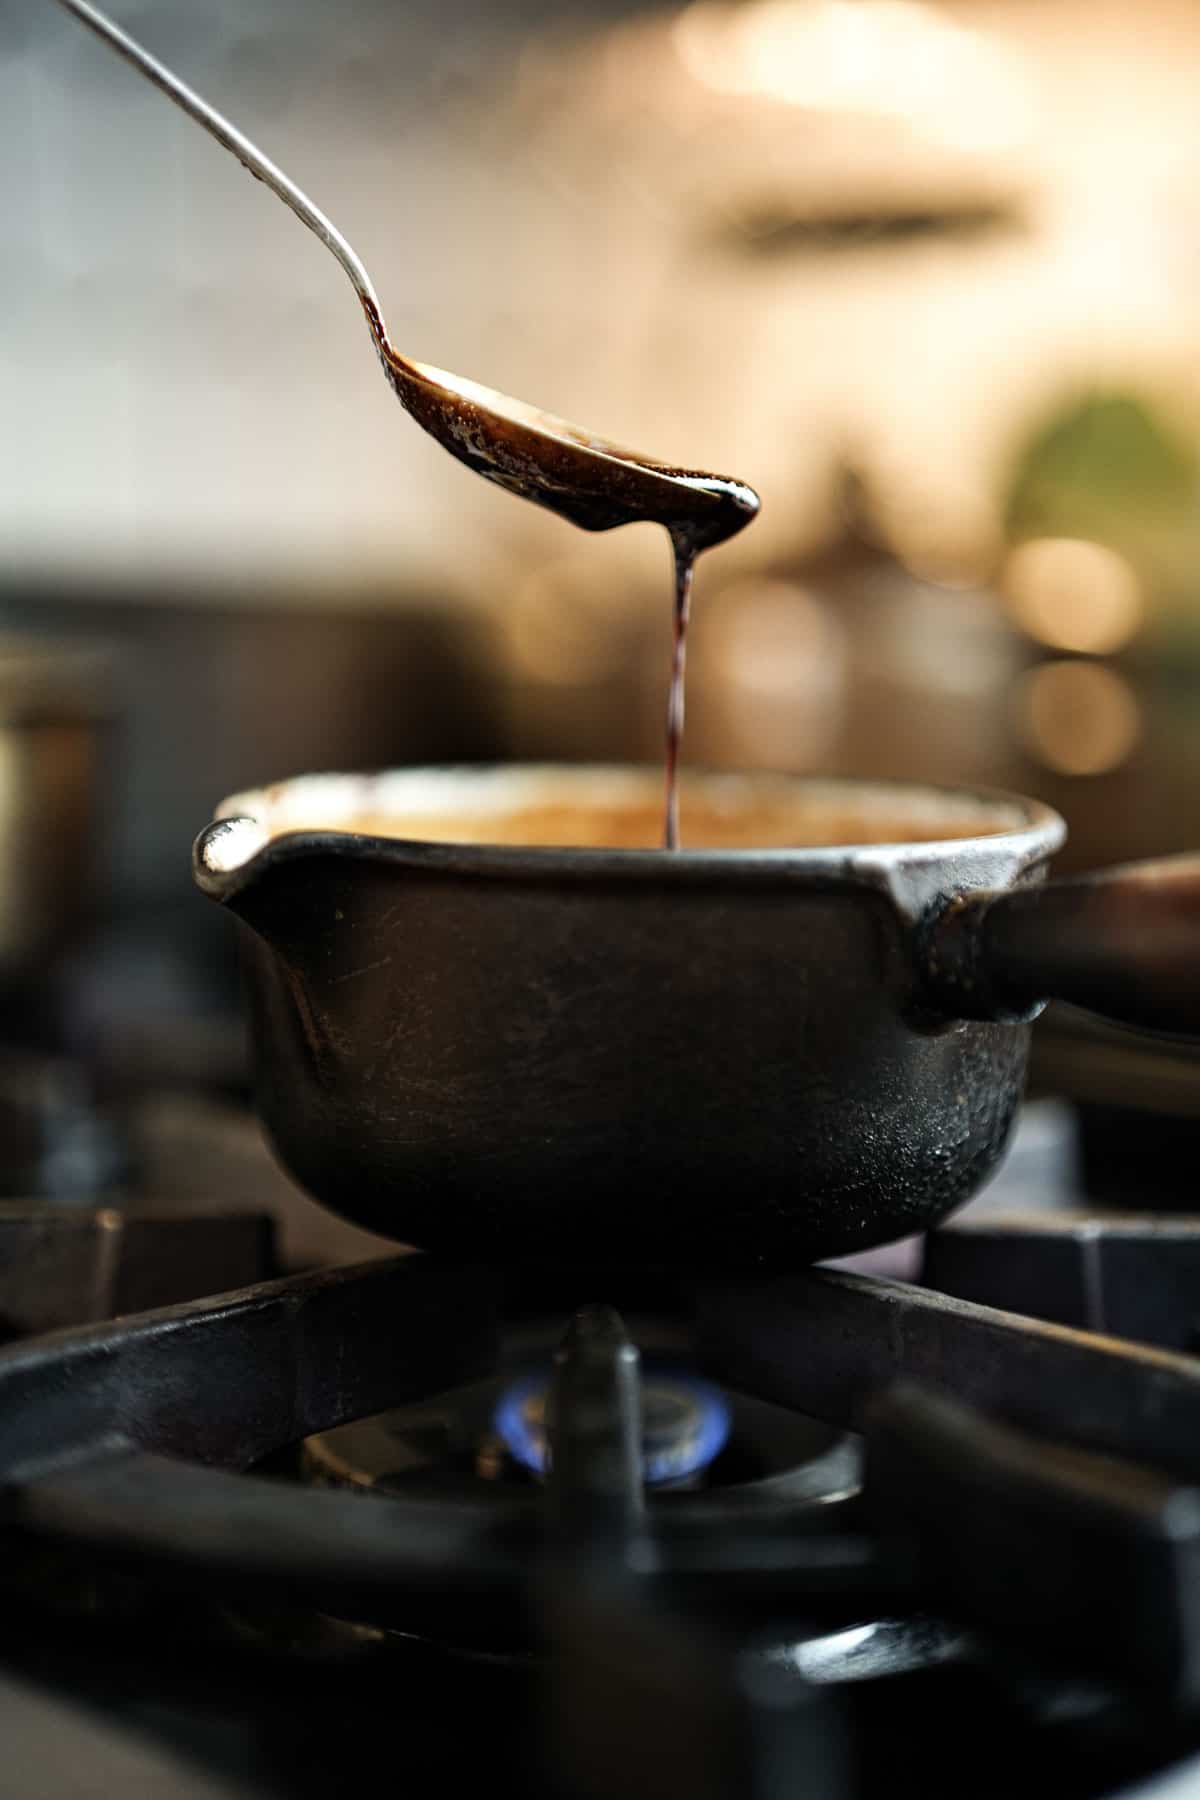 Kecap manis being simmered over a very low flame in a metal saucepan on the stove.